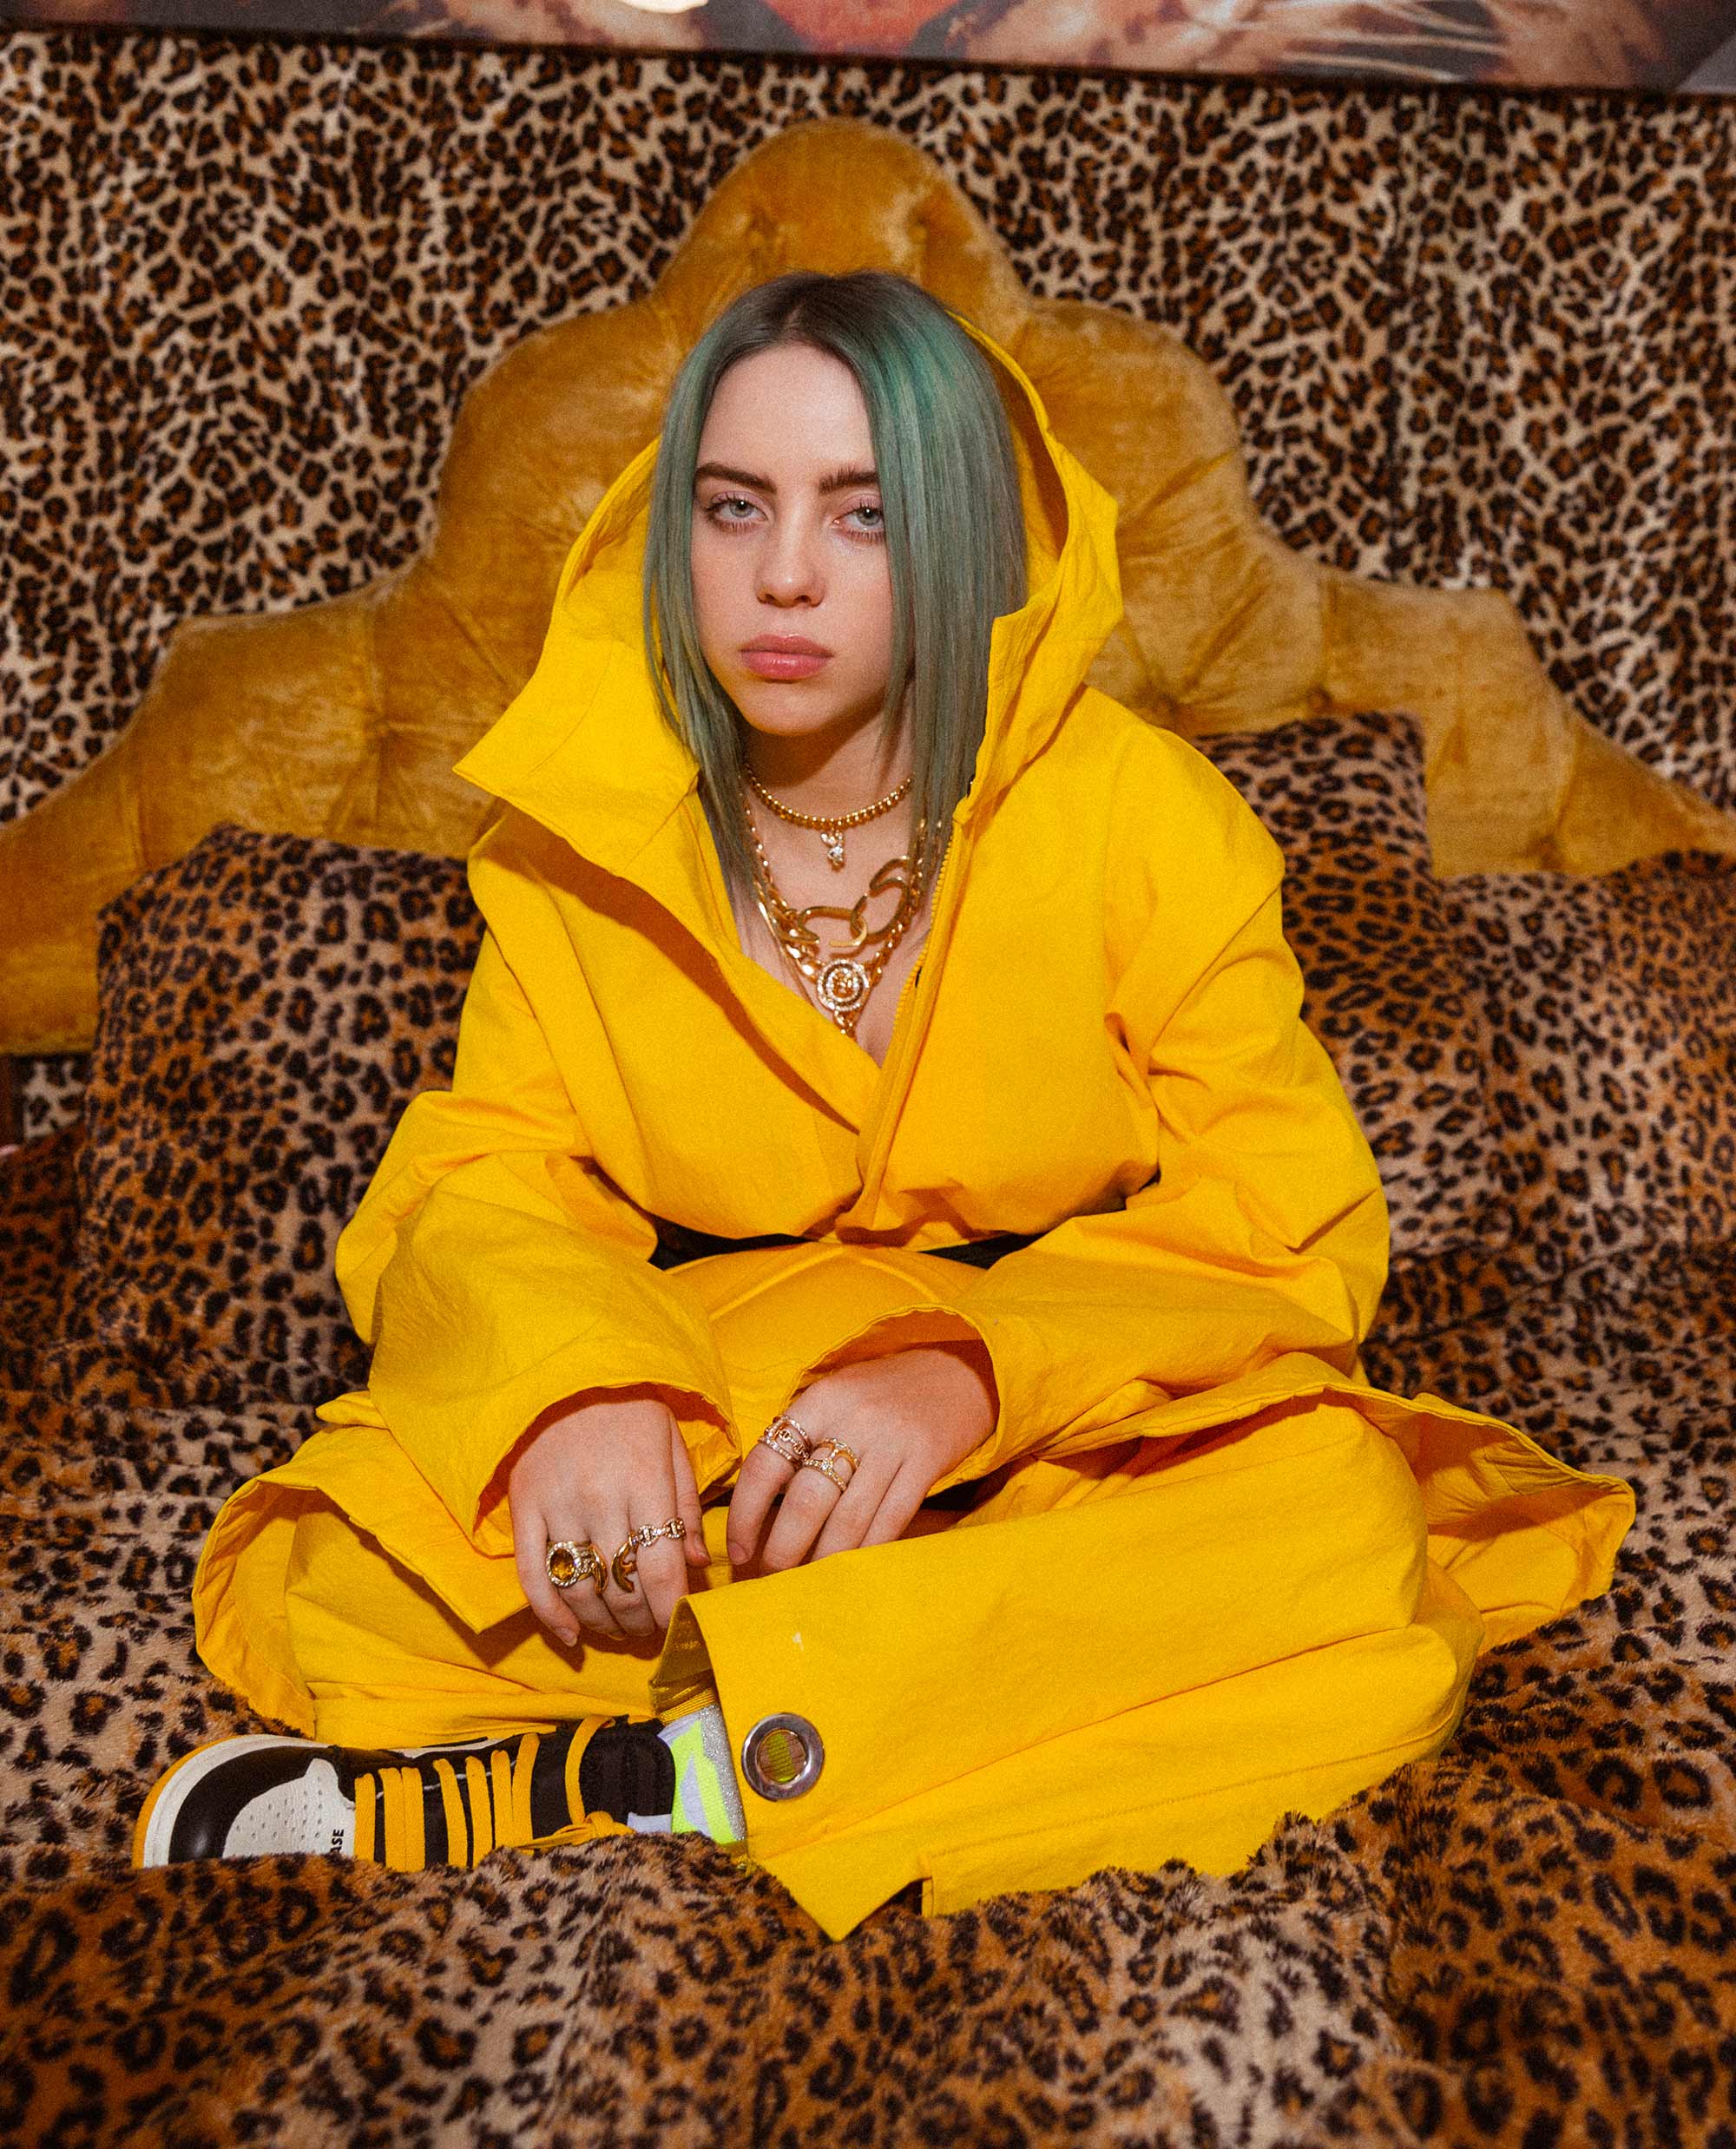 Billie Eilish Interview: The Most Talked About Teen On The Planet